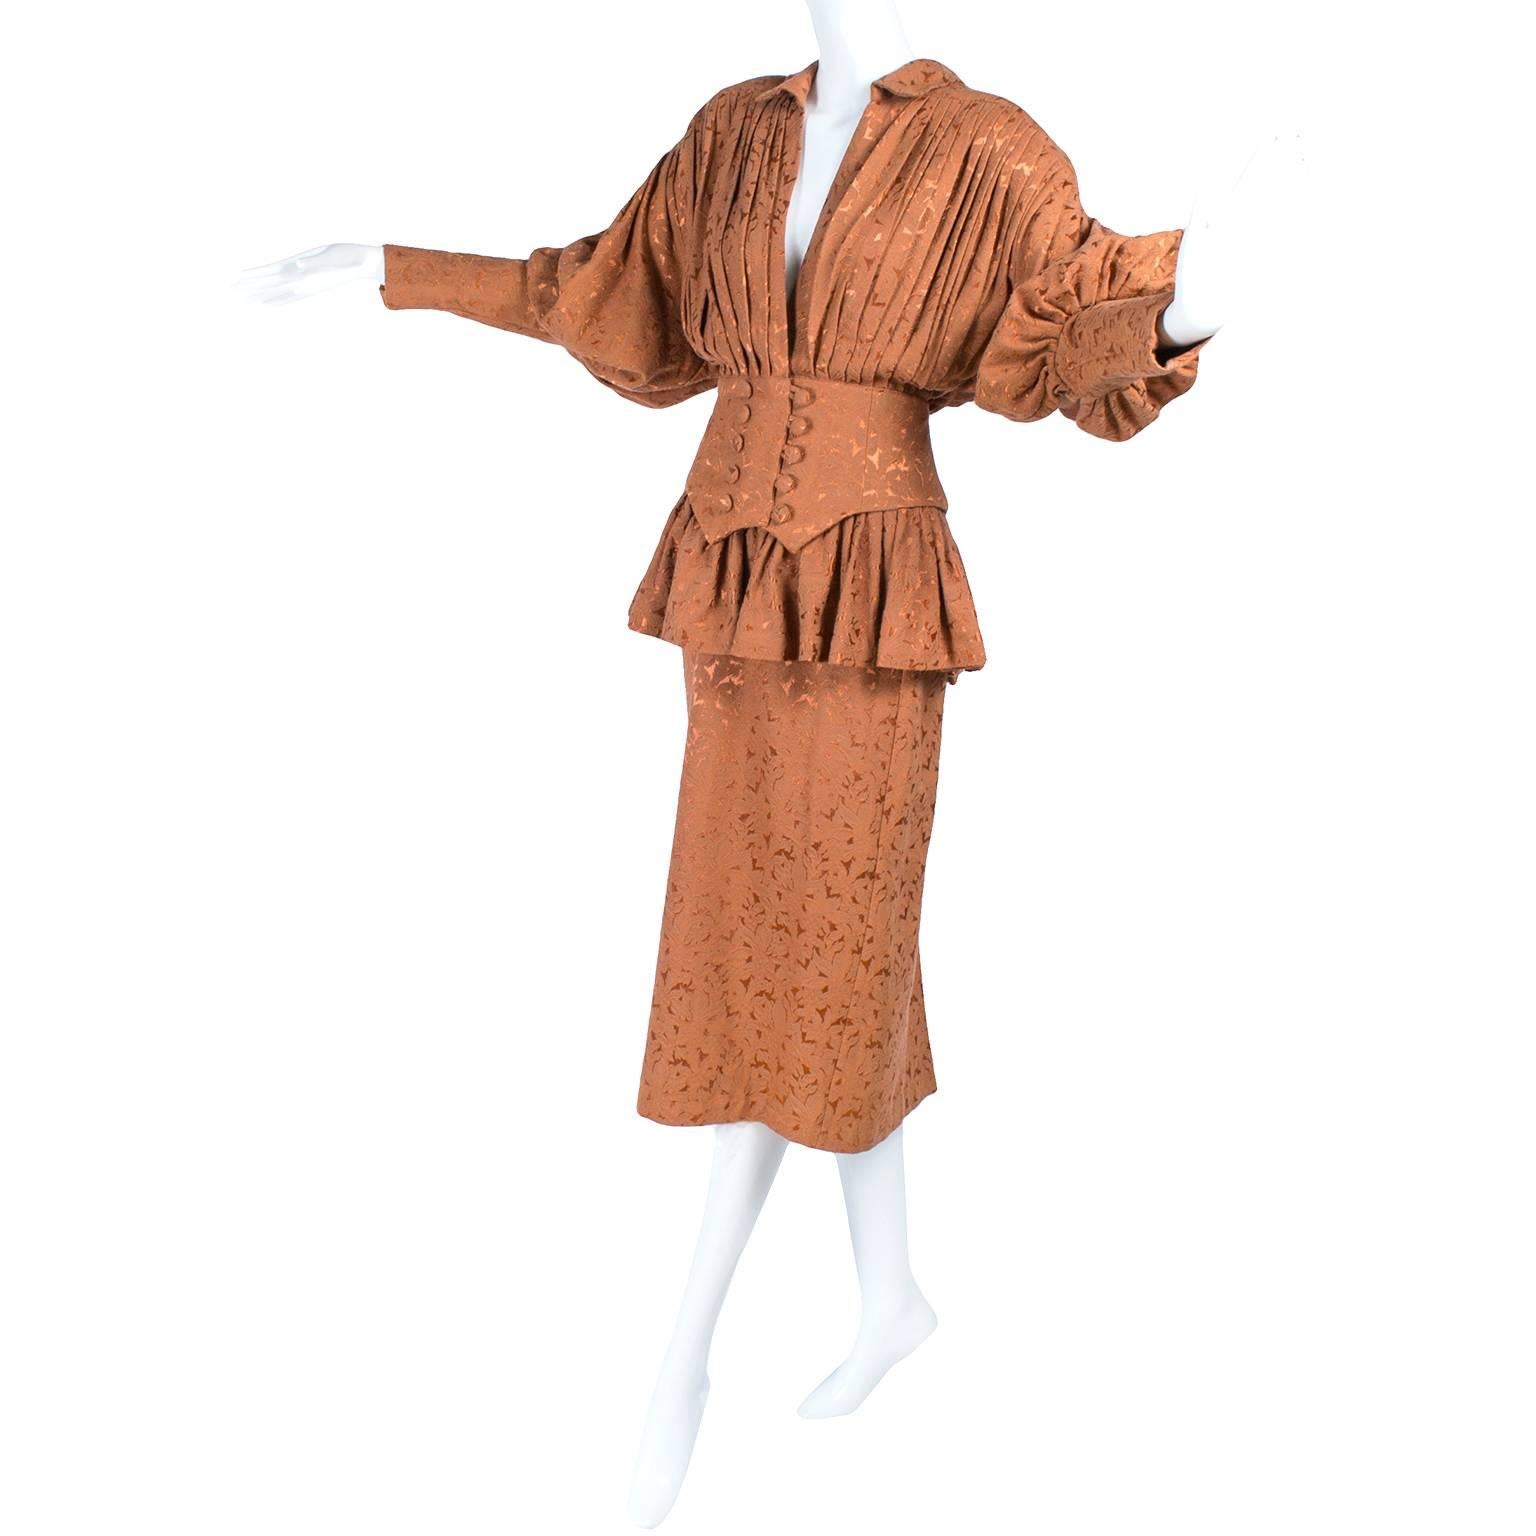 This is a rare Victorian style Norma Kamali skirt and jacket suit from the 1980's. This vintage Norma Kamali suit is iconic 1980's with shoulder pads and a cinched waist. The outfit is made in a copper jacquard fabric and the details are incredible.